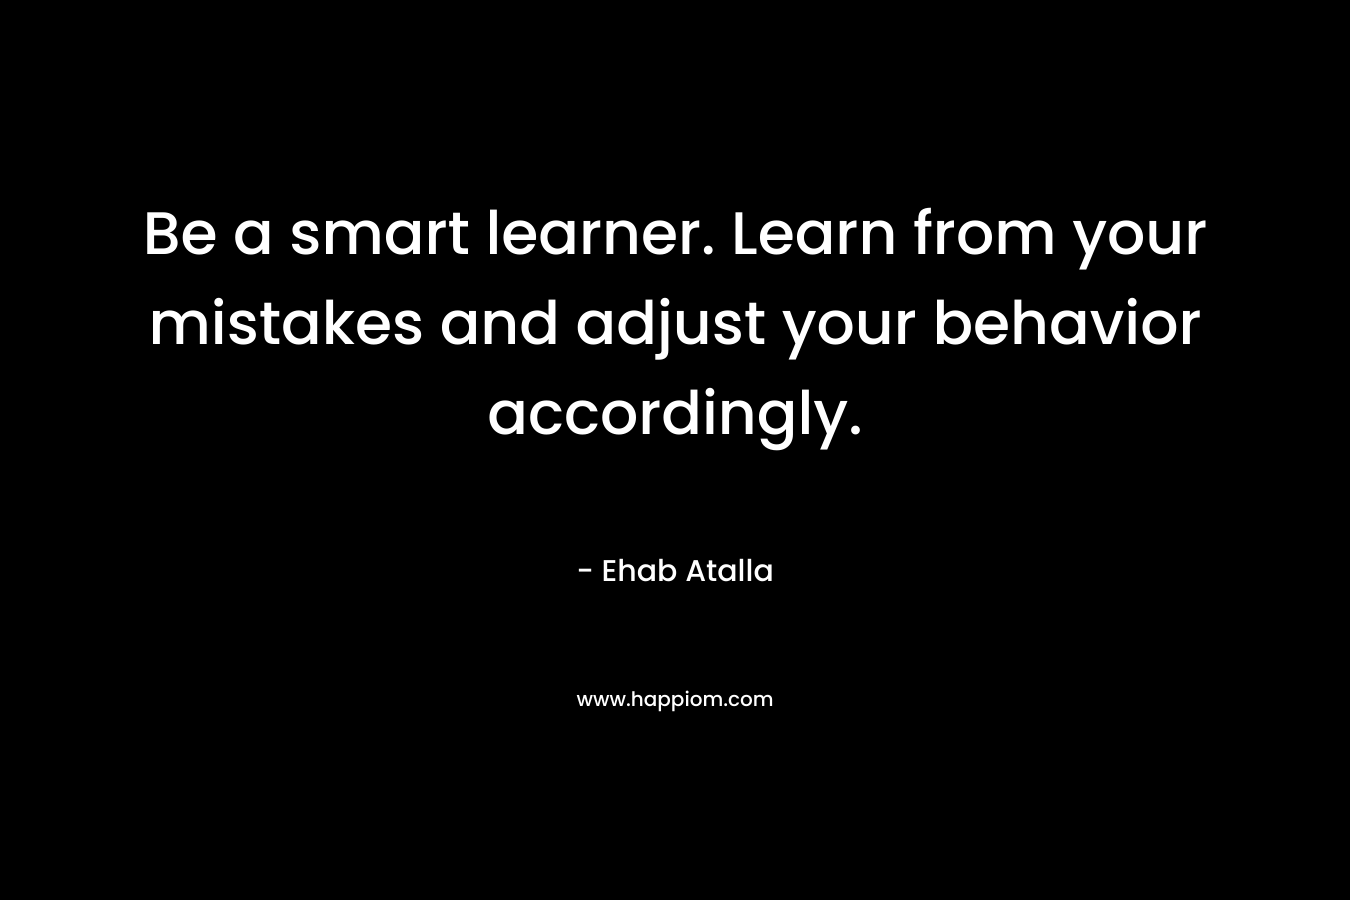 Be a smart learner. Learn from your mistakes and adjust your behavior accordingly.